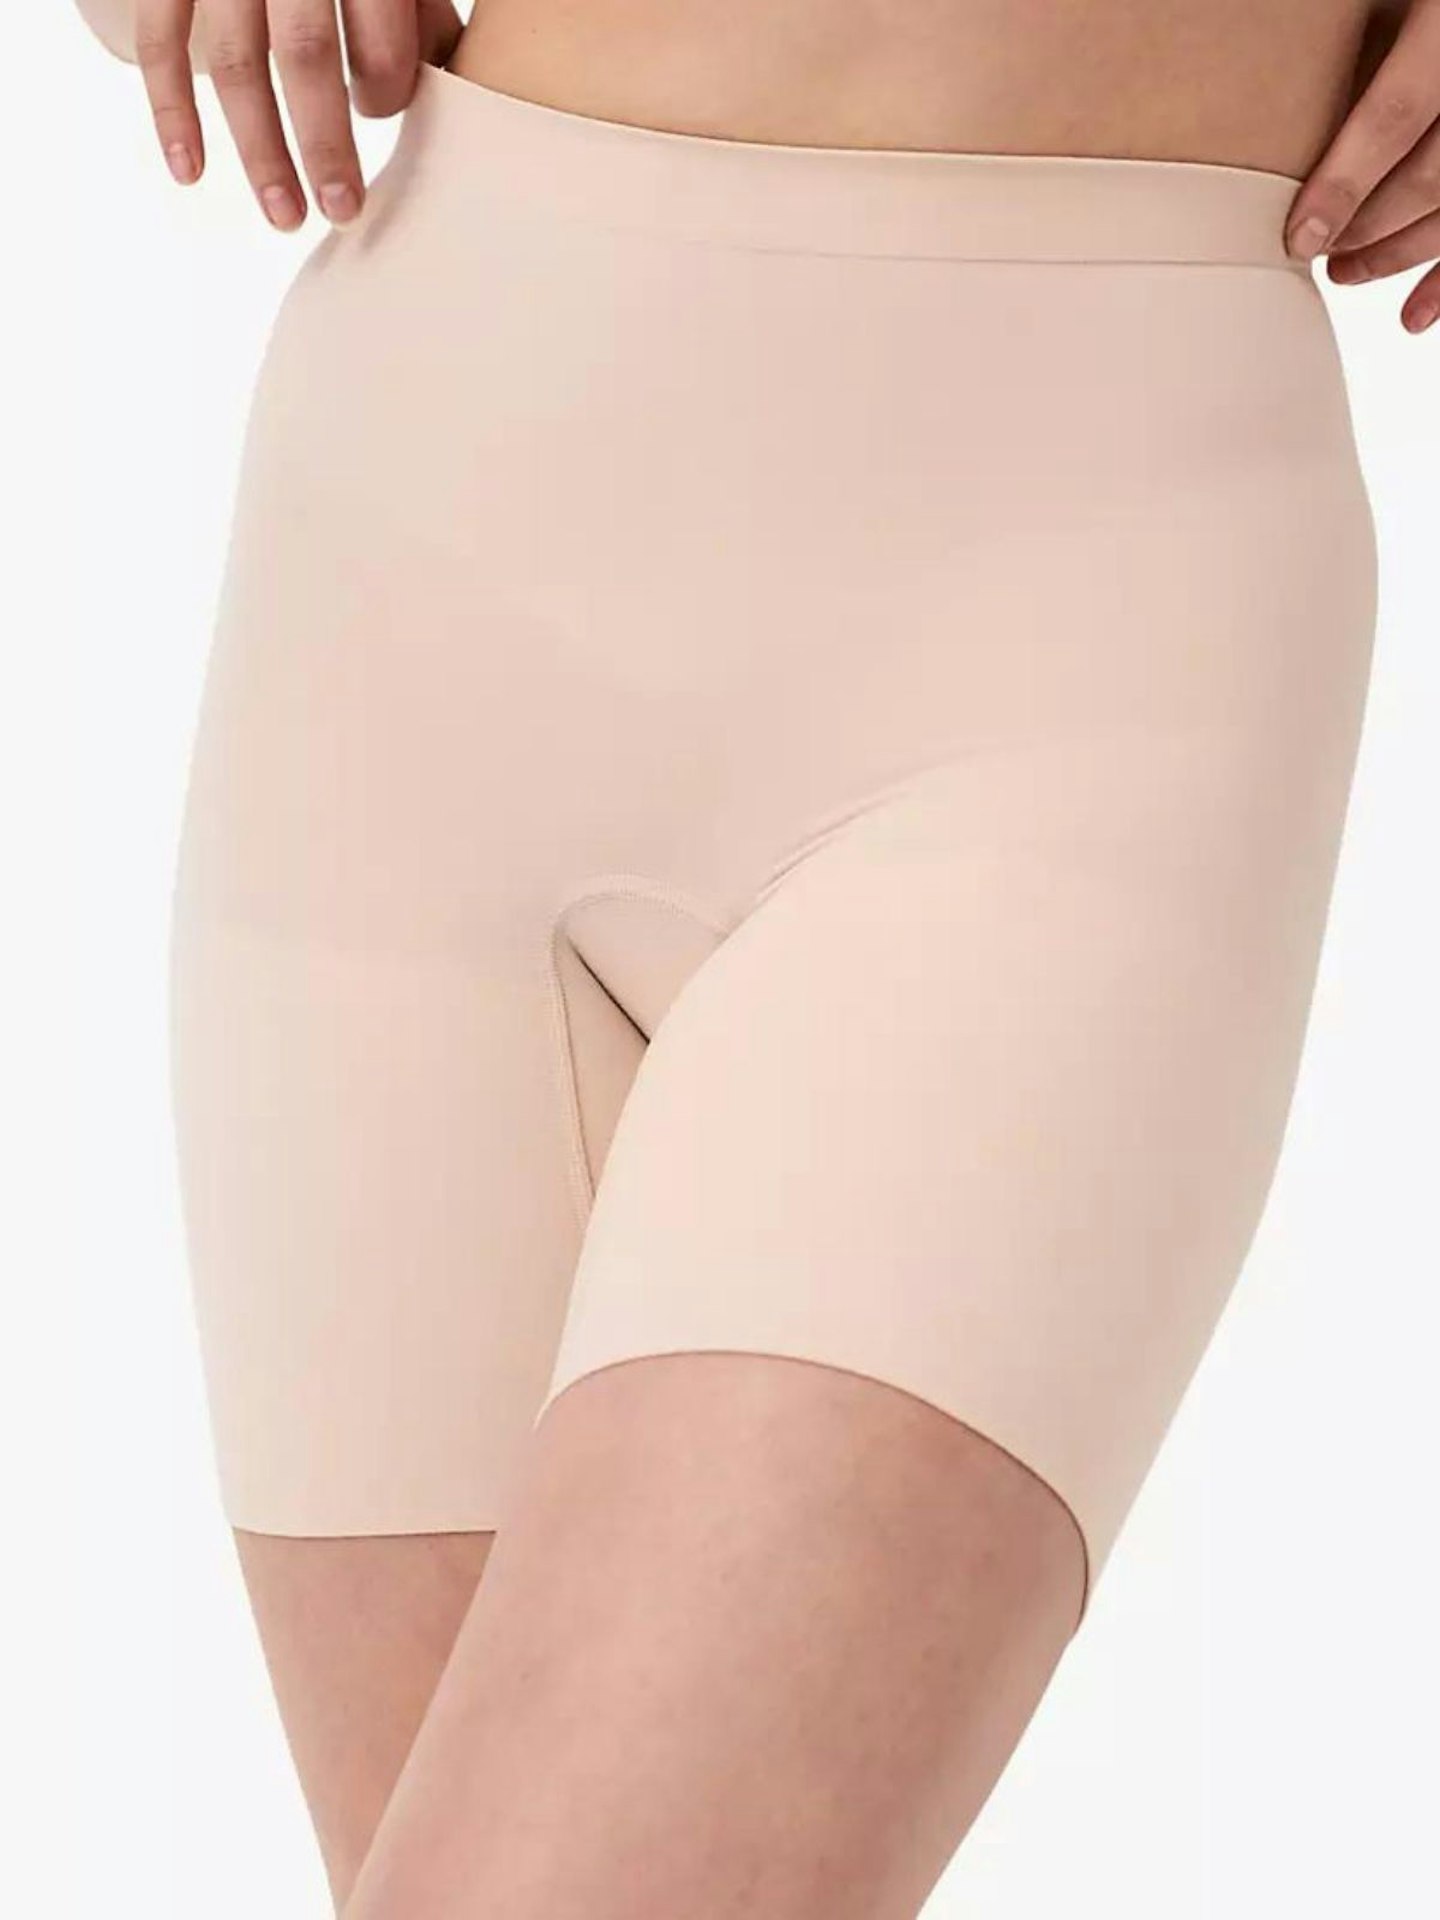 Best shapewear: From M&S to Spanx, Skims, John Lewis & MORE